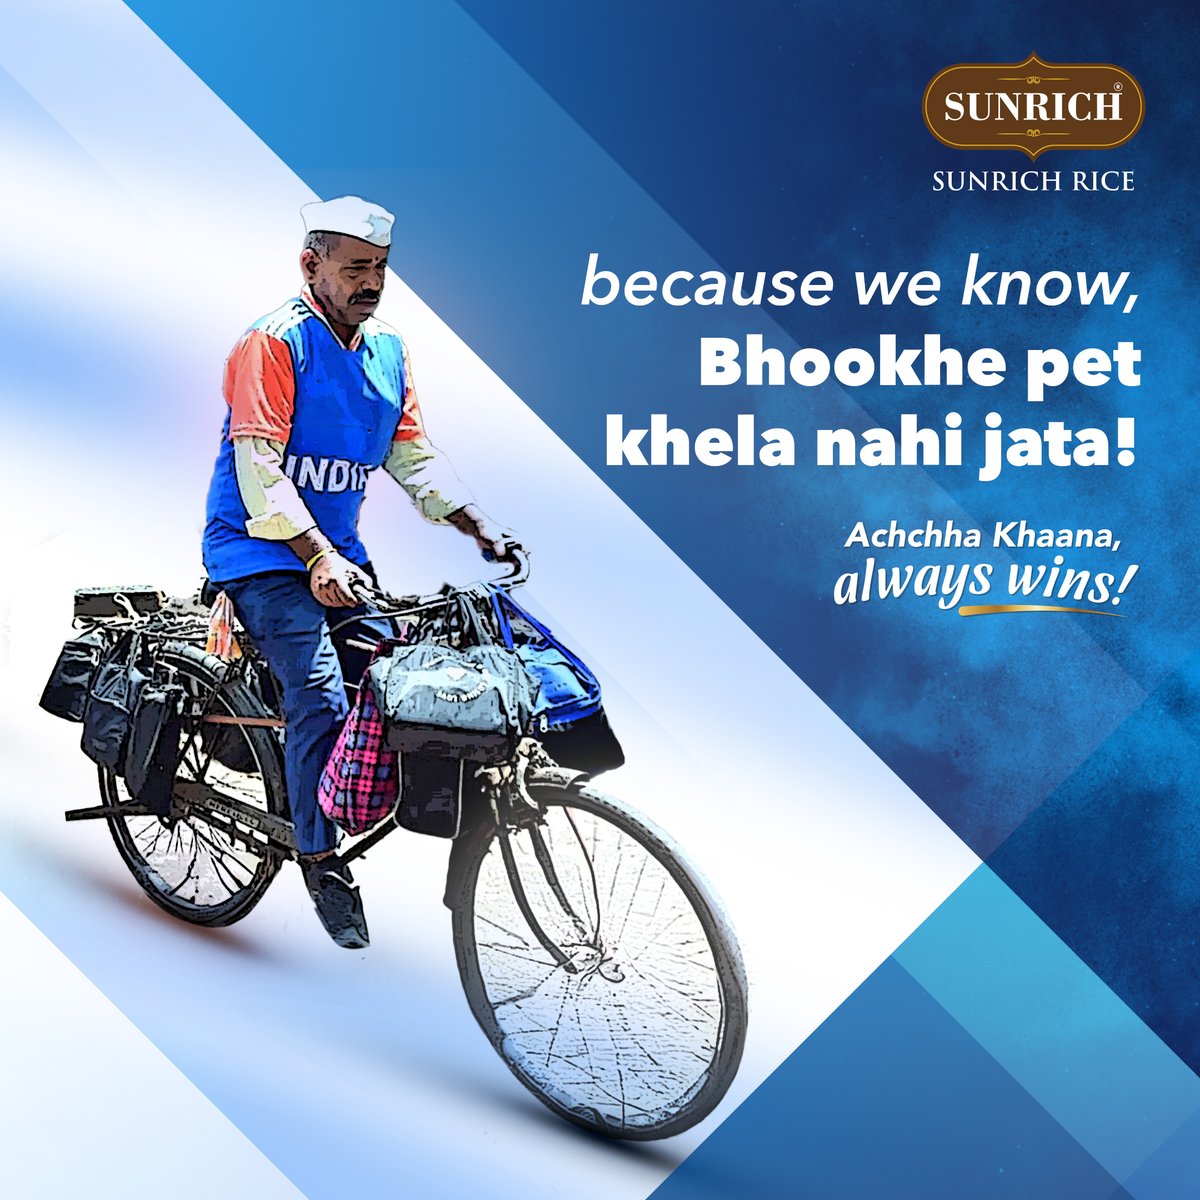 The #Dabbawalas of Mumbai are ready to cheer India!
Are you ready?

Try everyone's favorite #SunrichRice bcoz we know bhookhe pet khela nahi jata!

This game is going to be epic because #AchchhaKhaanaAlwaysWins
Stay Tuned!

#SunrichBasmati #WeAreRicing #RohitSharma #CheerForIndia